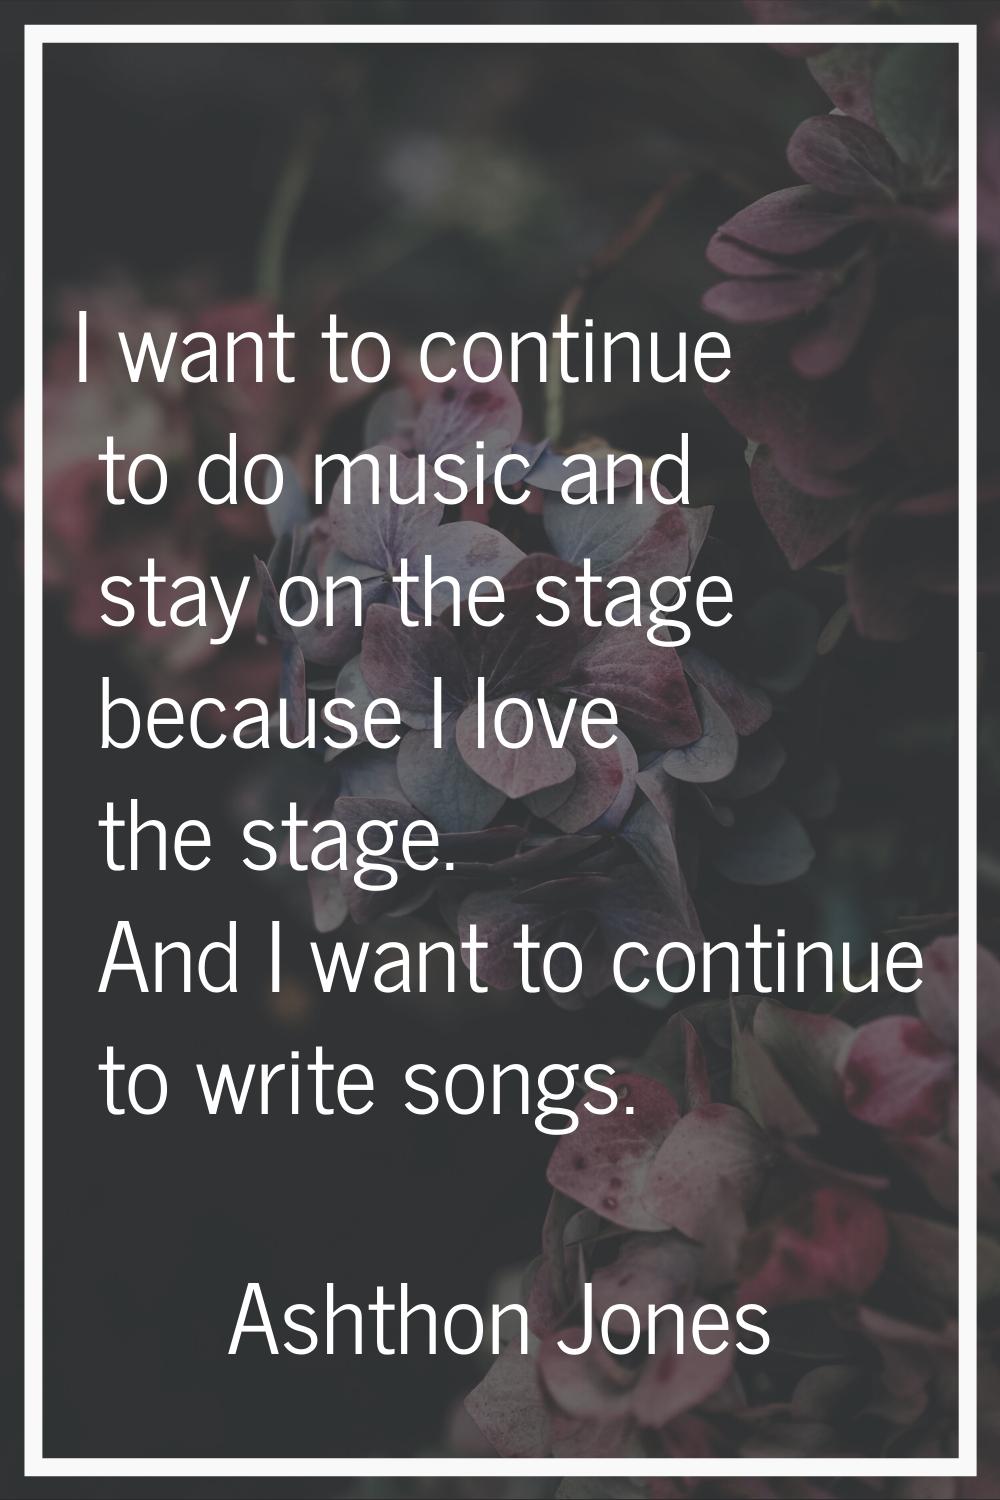 I want to continue to do music and stay on the stage because I love the stage. And I want to contin